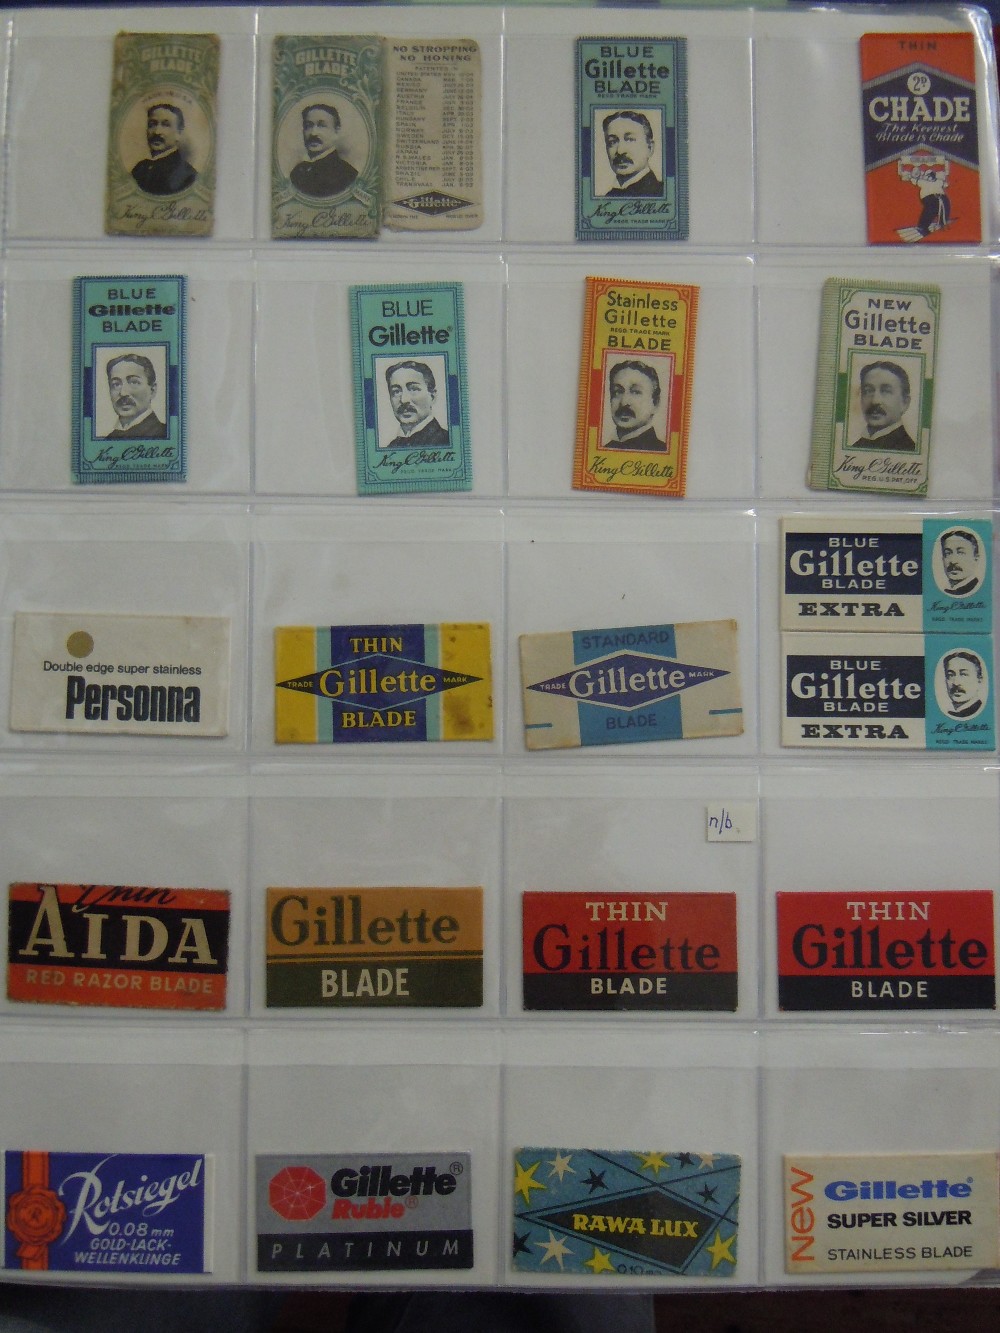 Razor Blades In original wrappers - A quite incredible life-long collection - an immaculate